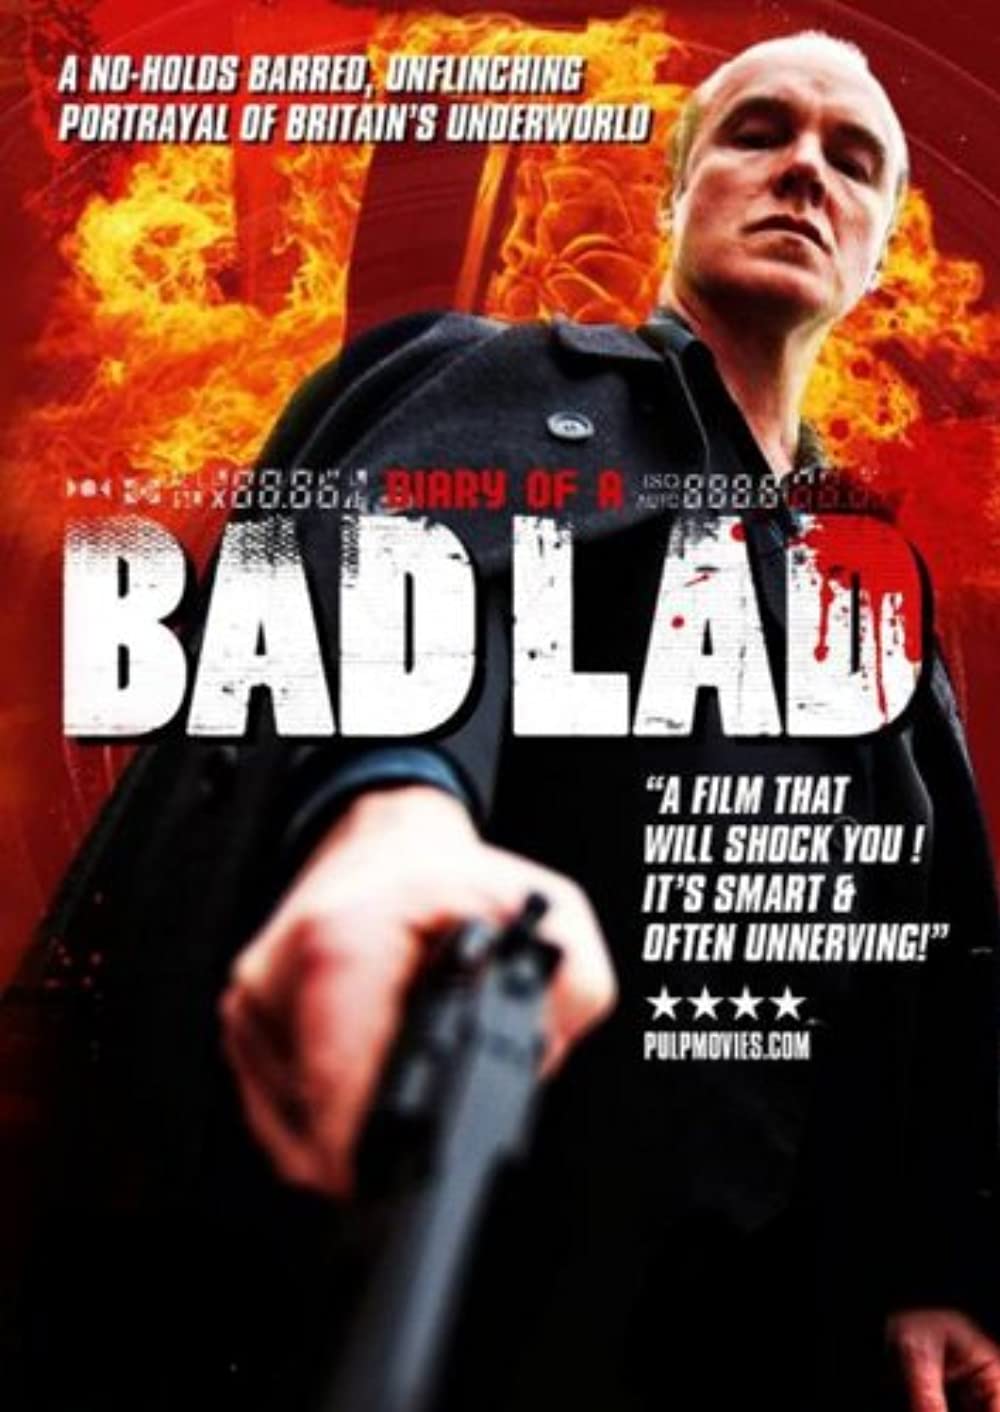 Download Diary of a Bad Lad Movie | Diary Of A Bad Lad